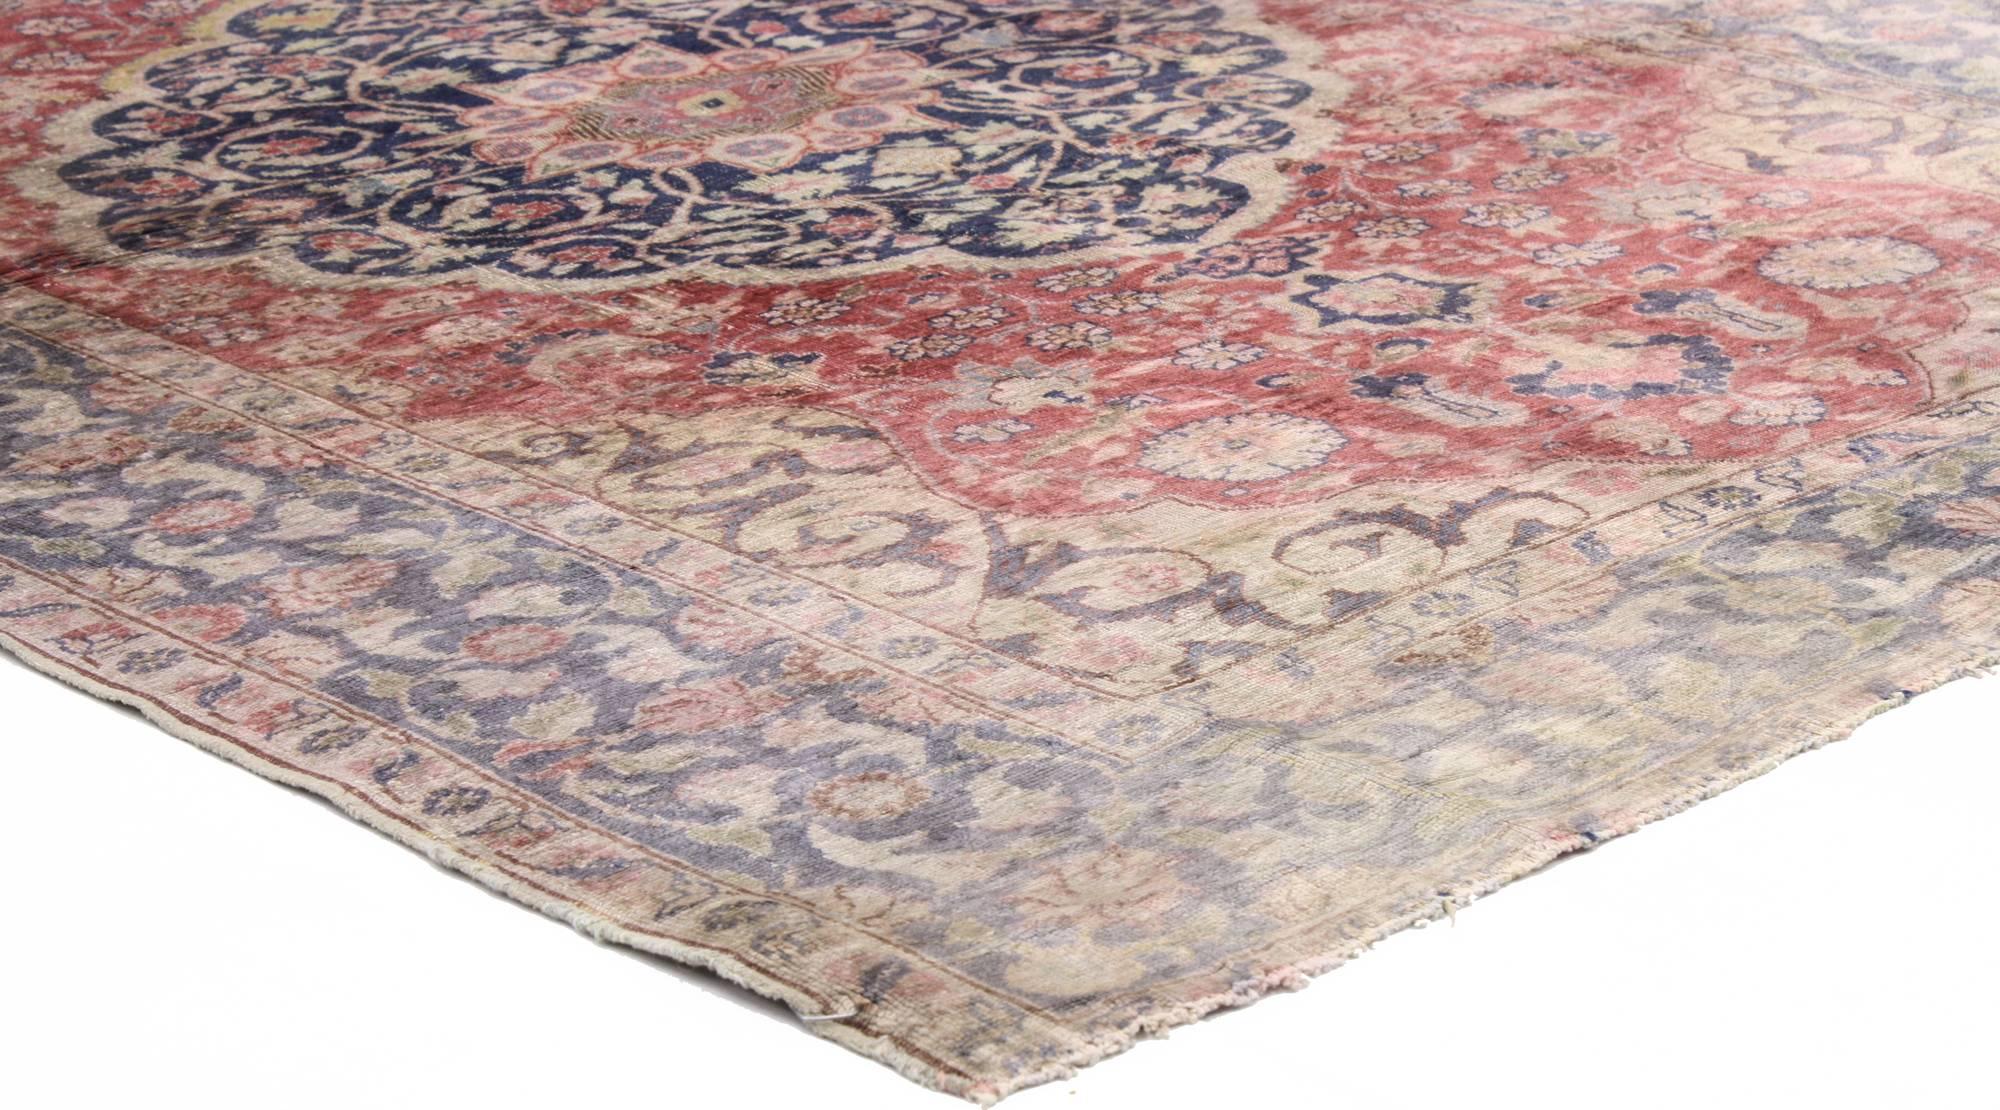 51168 distressed vintage Turkish Sivas rug with romantic English country style. This distressed vintage Turkish Sivas rug features a cussed center medallion anchored with pendant finials at either end. The medallion is surrounded by an array of